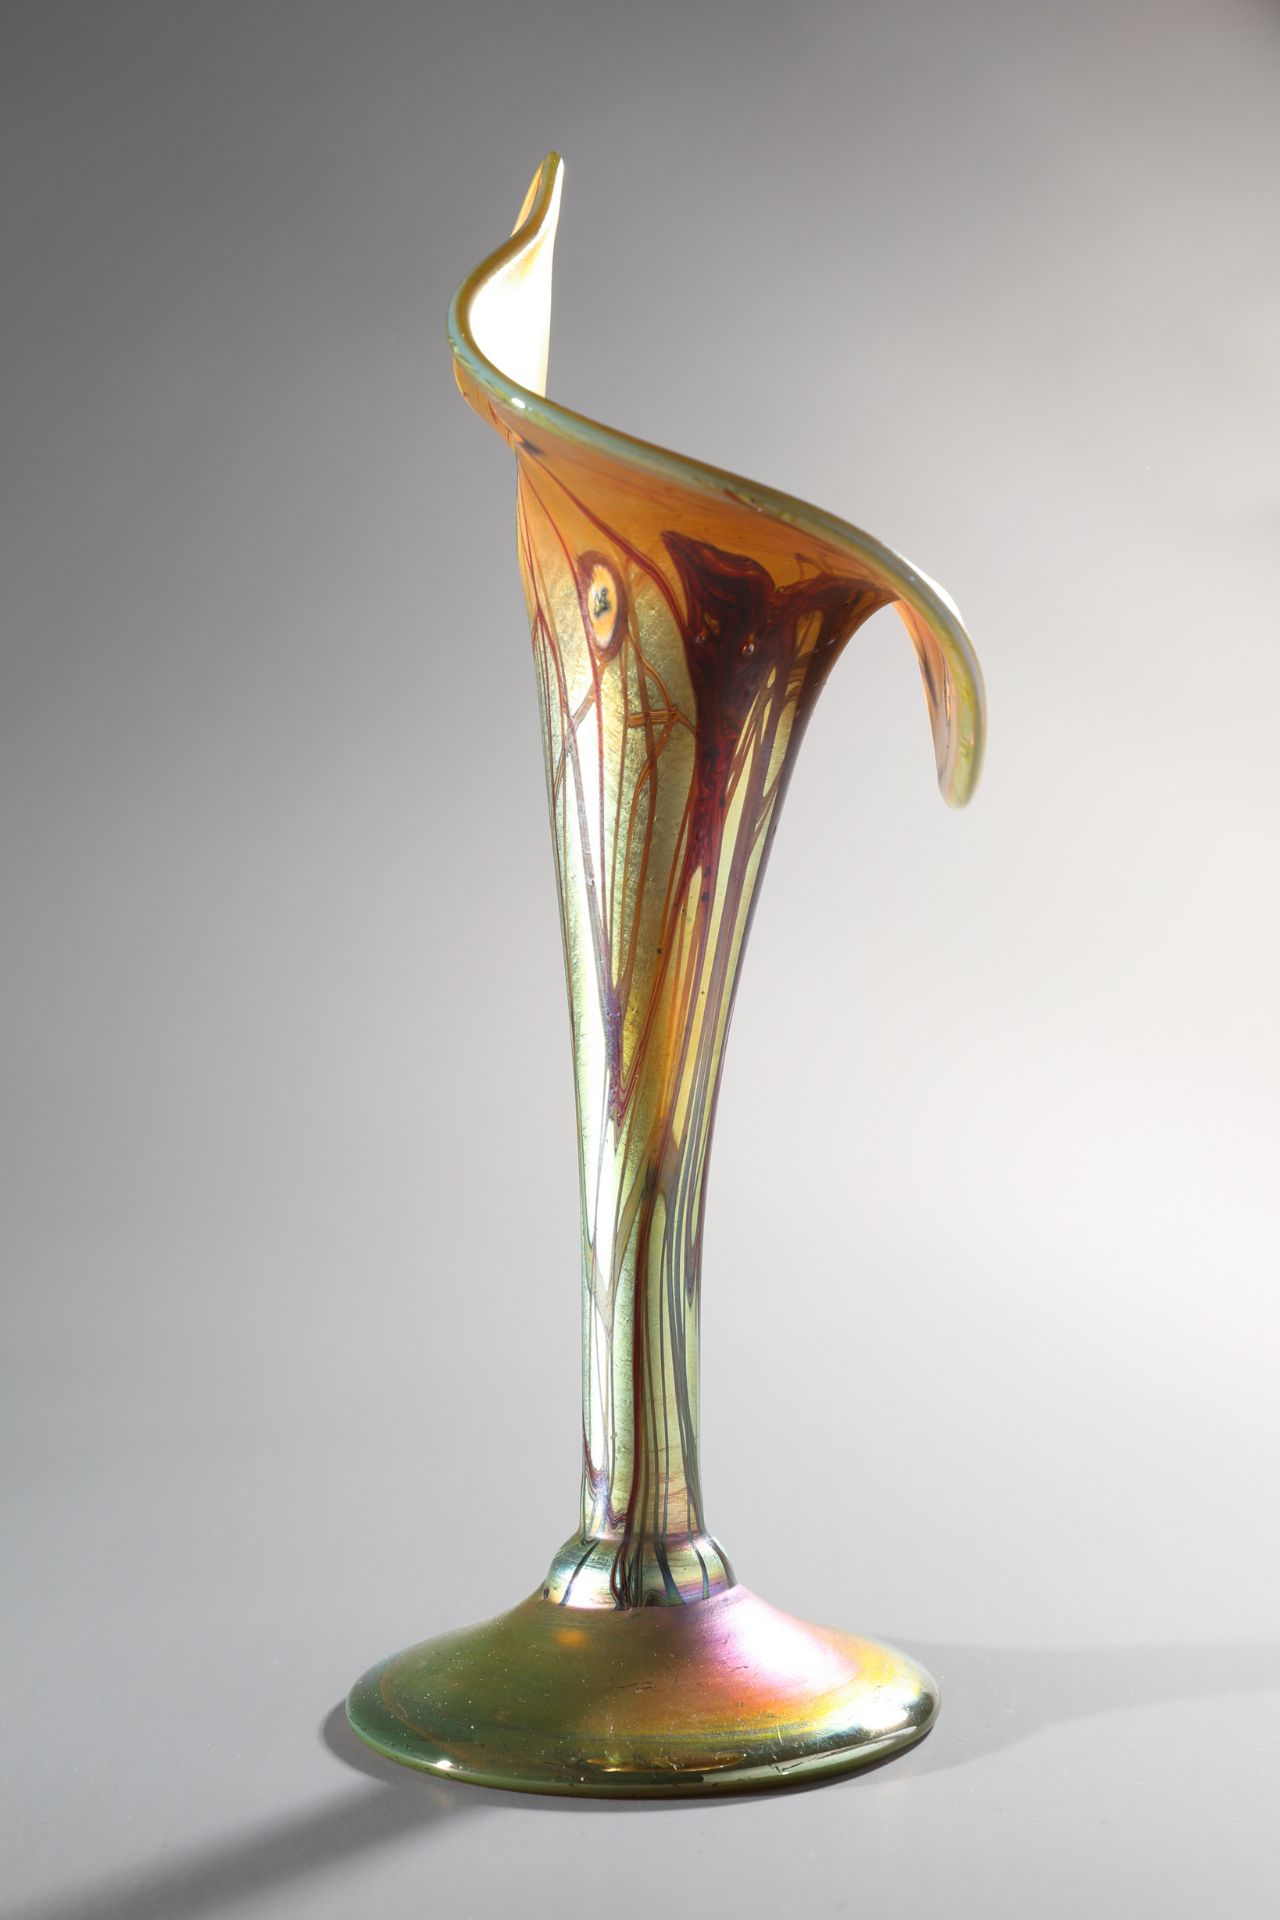 Louis C. Tiffany, Favrile flower cup, around 1904 - Image 4 of 7